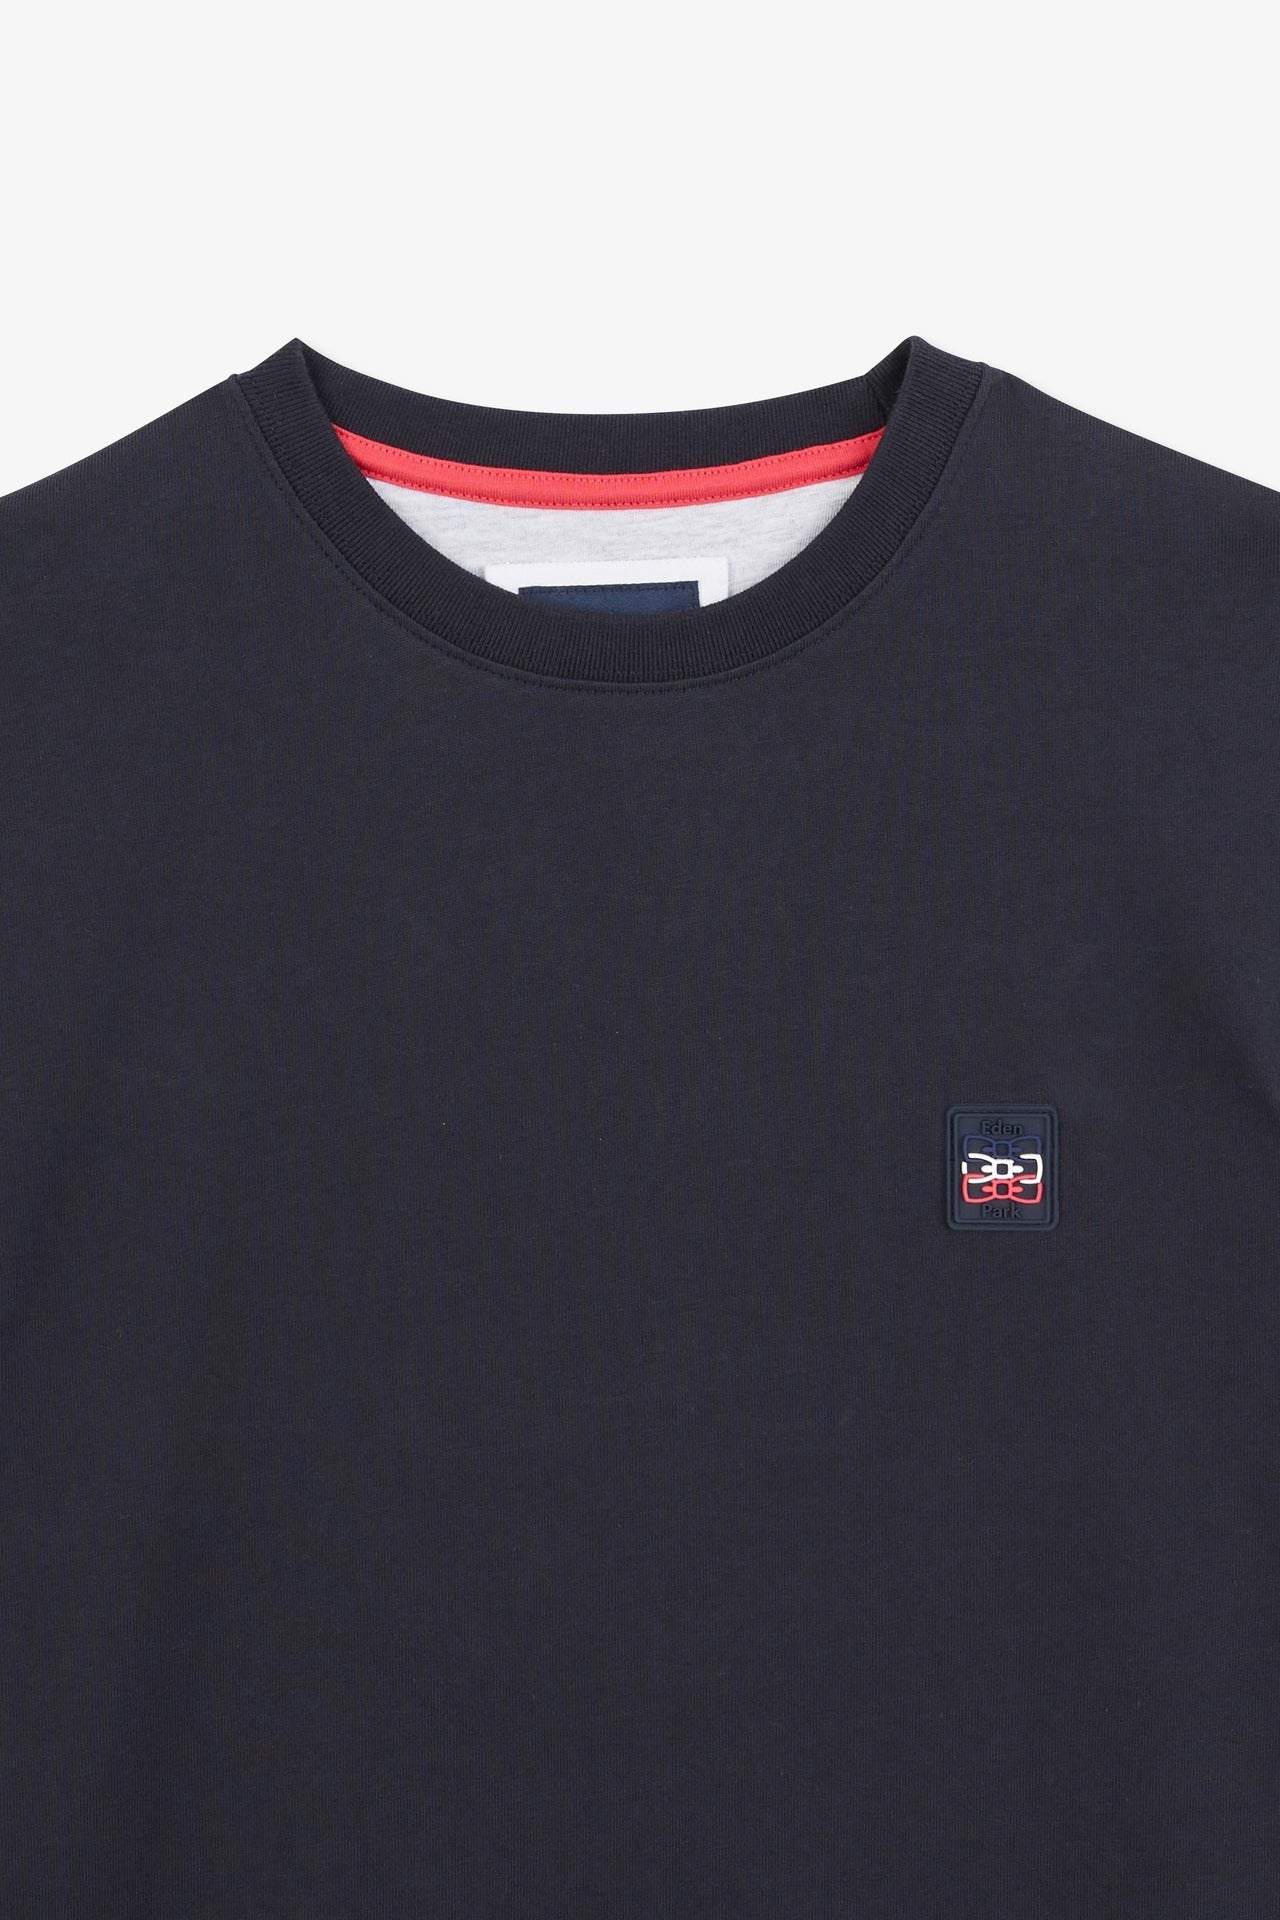 Navy blue short-sleeved T-shirt with embossed logo